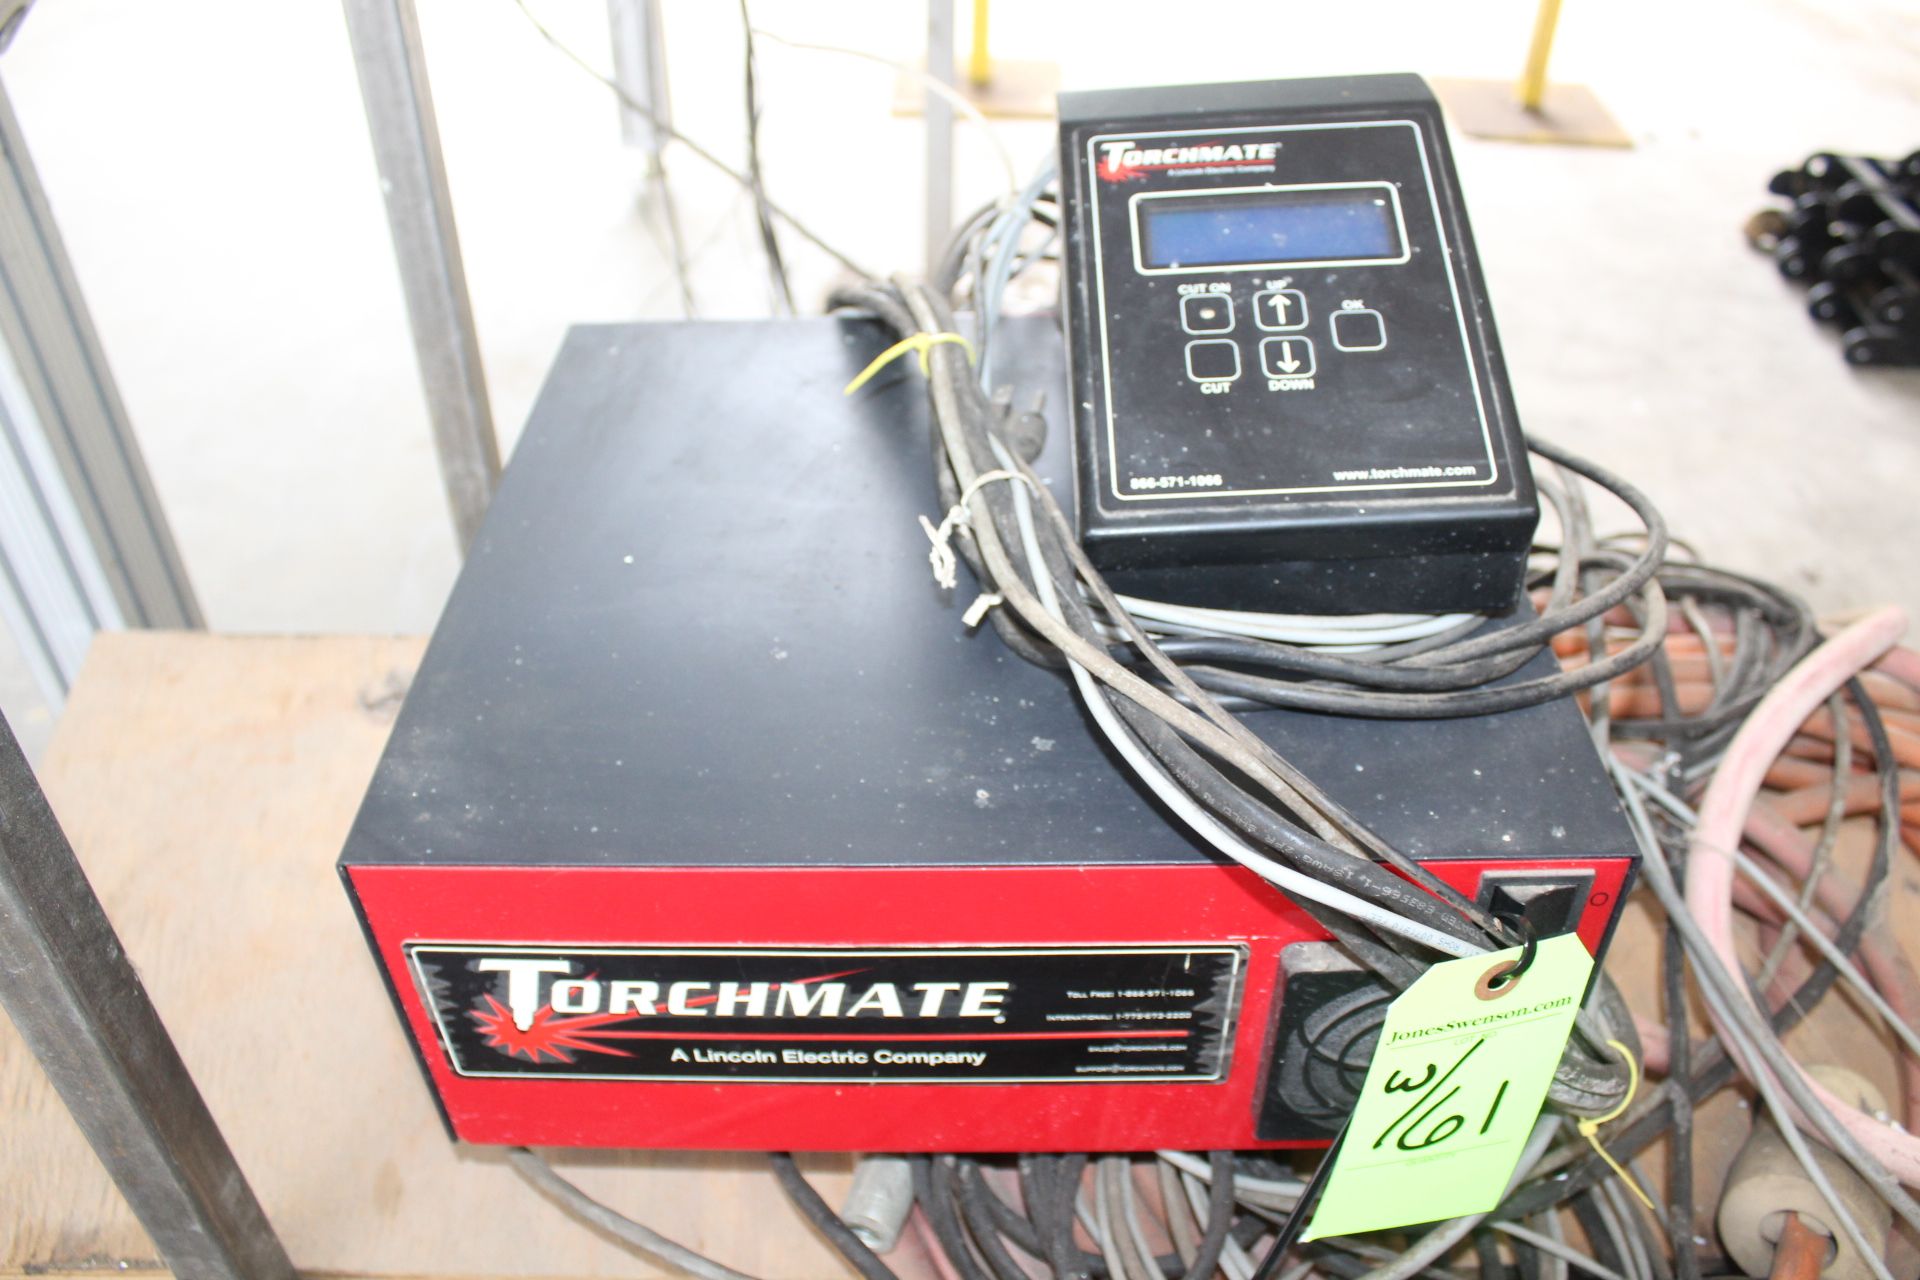 Torchmate Plasma CNC Cutting System with Torchmate Controller, Powermax 85 Hypertherm Plasma Cutter - Image 7 of 9